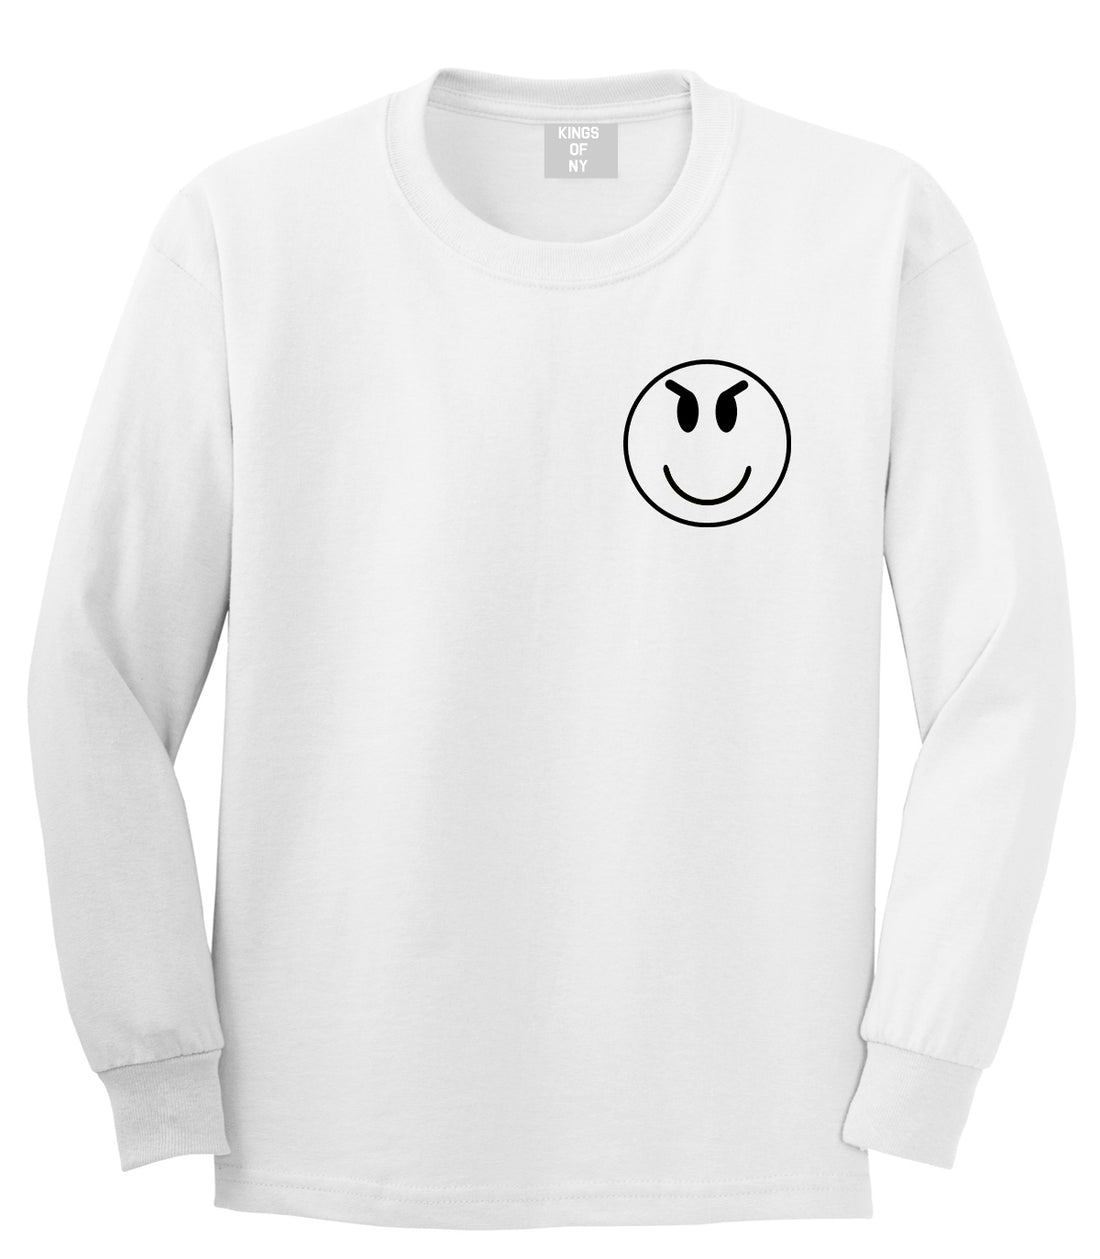 Evil Face Emoji Chest Mens White Long Sleeve T-Shirt by KINGS OF NY